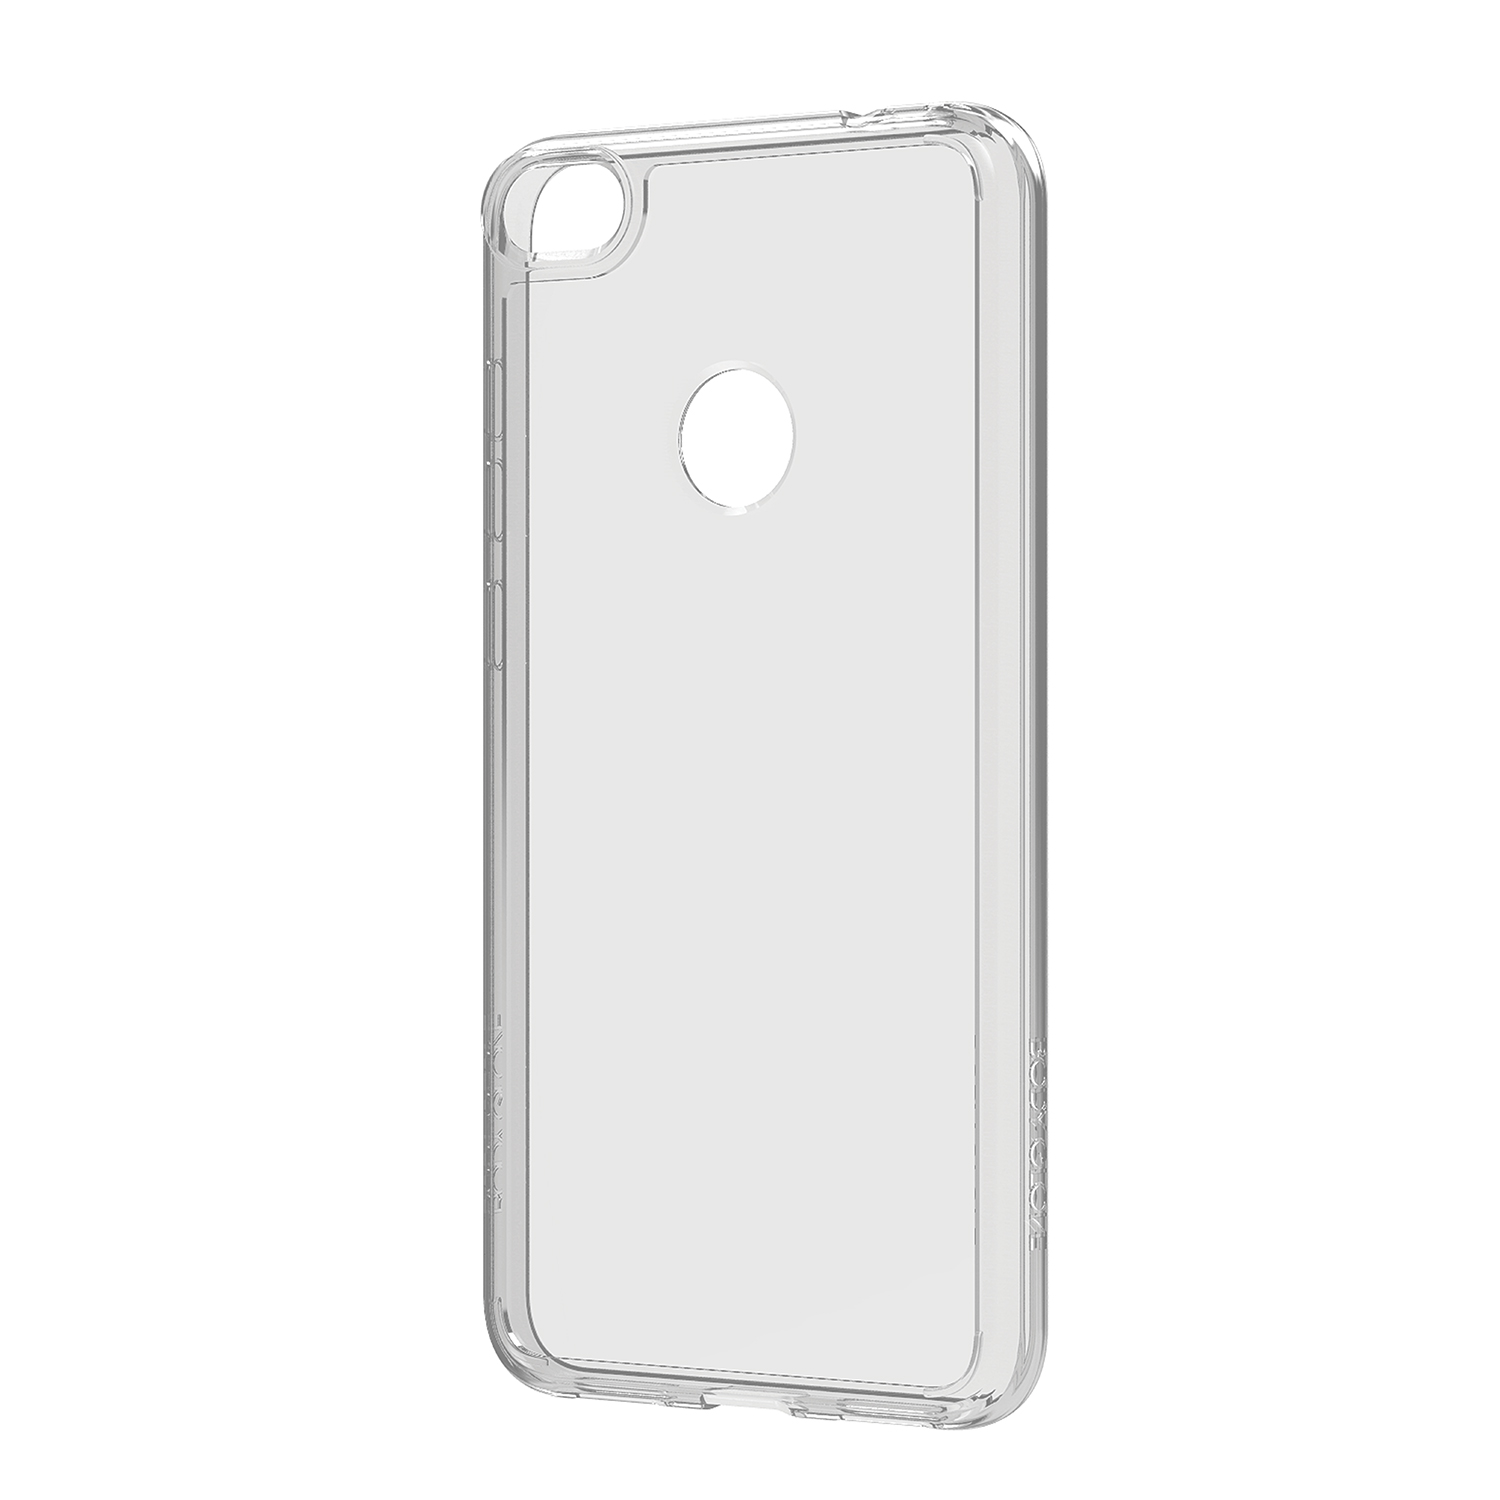 Body Glove Ghost Case for Huawei P8 - Clear